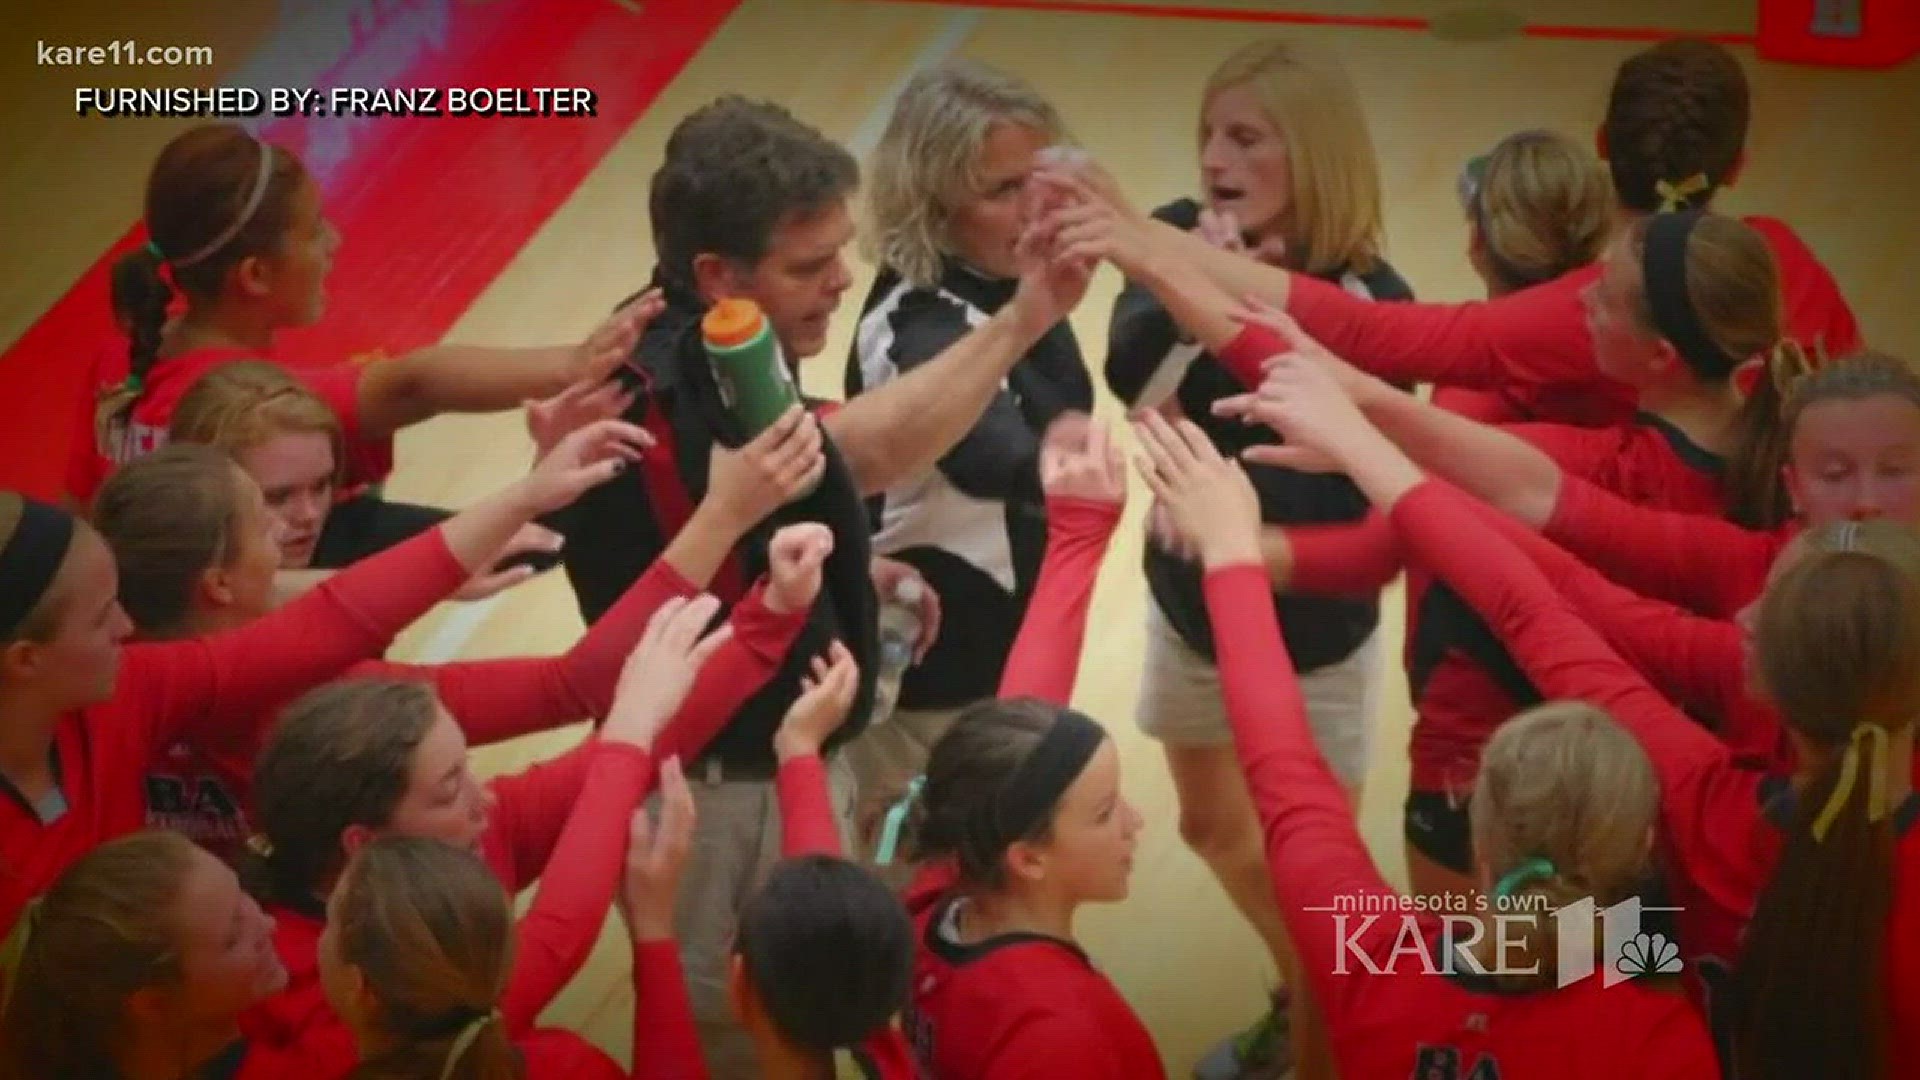 Seven-time state champion high school volleyball coach Franz Boelter has been fired, and his supporters claim parents upset about playing time are to blame. http://kare11.tv/2nXzF8q